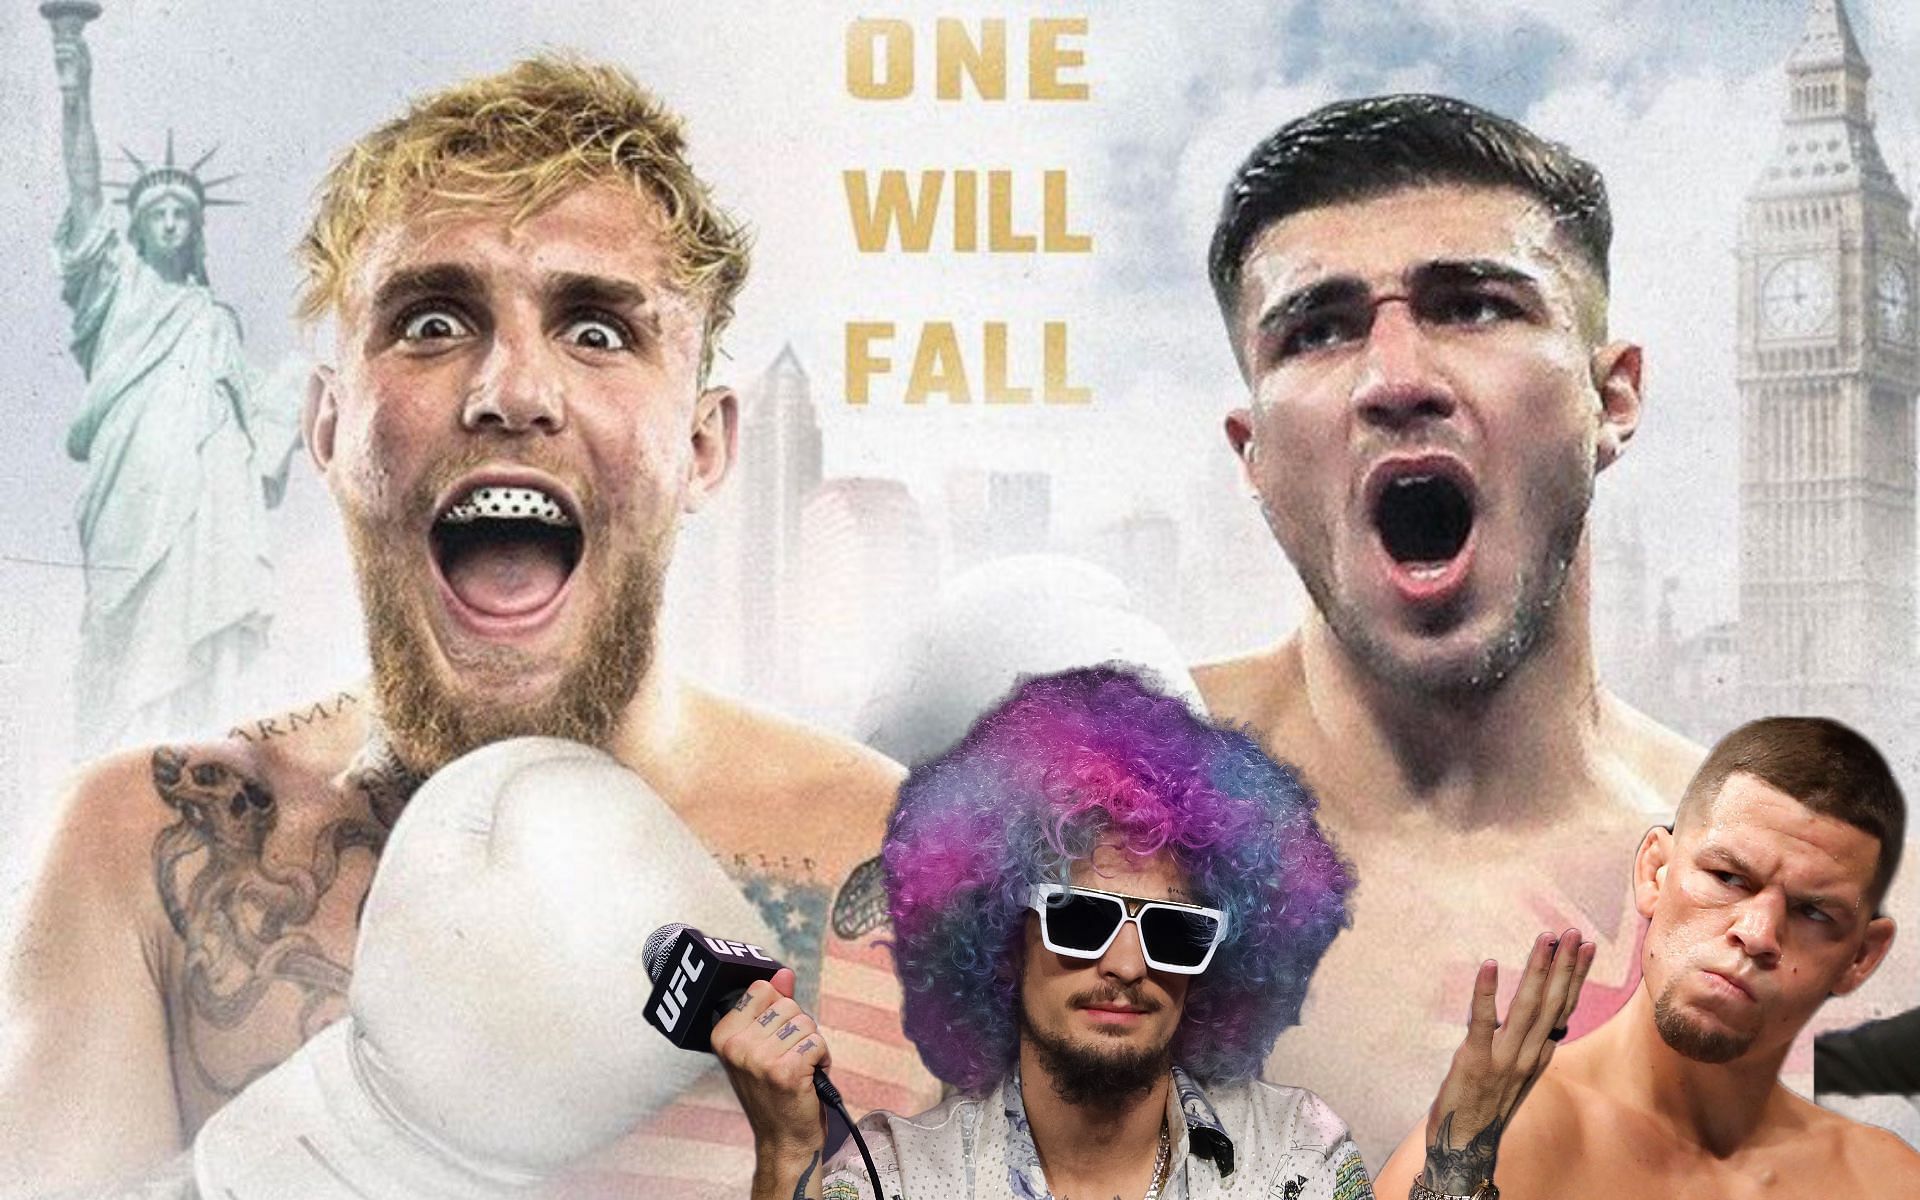 Jake Paul (left), Tommy Fury (right), Sean O&#039;Malley (front left), Nate Diaz (front right) (Images via Getty and Twitter/Jake Paul)